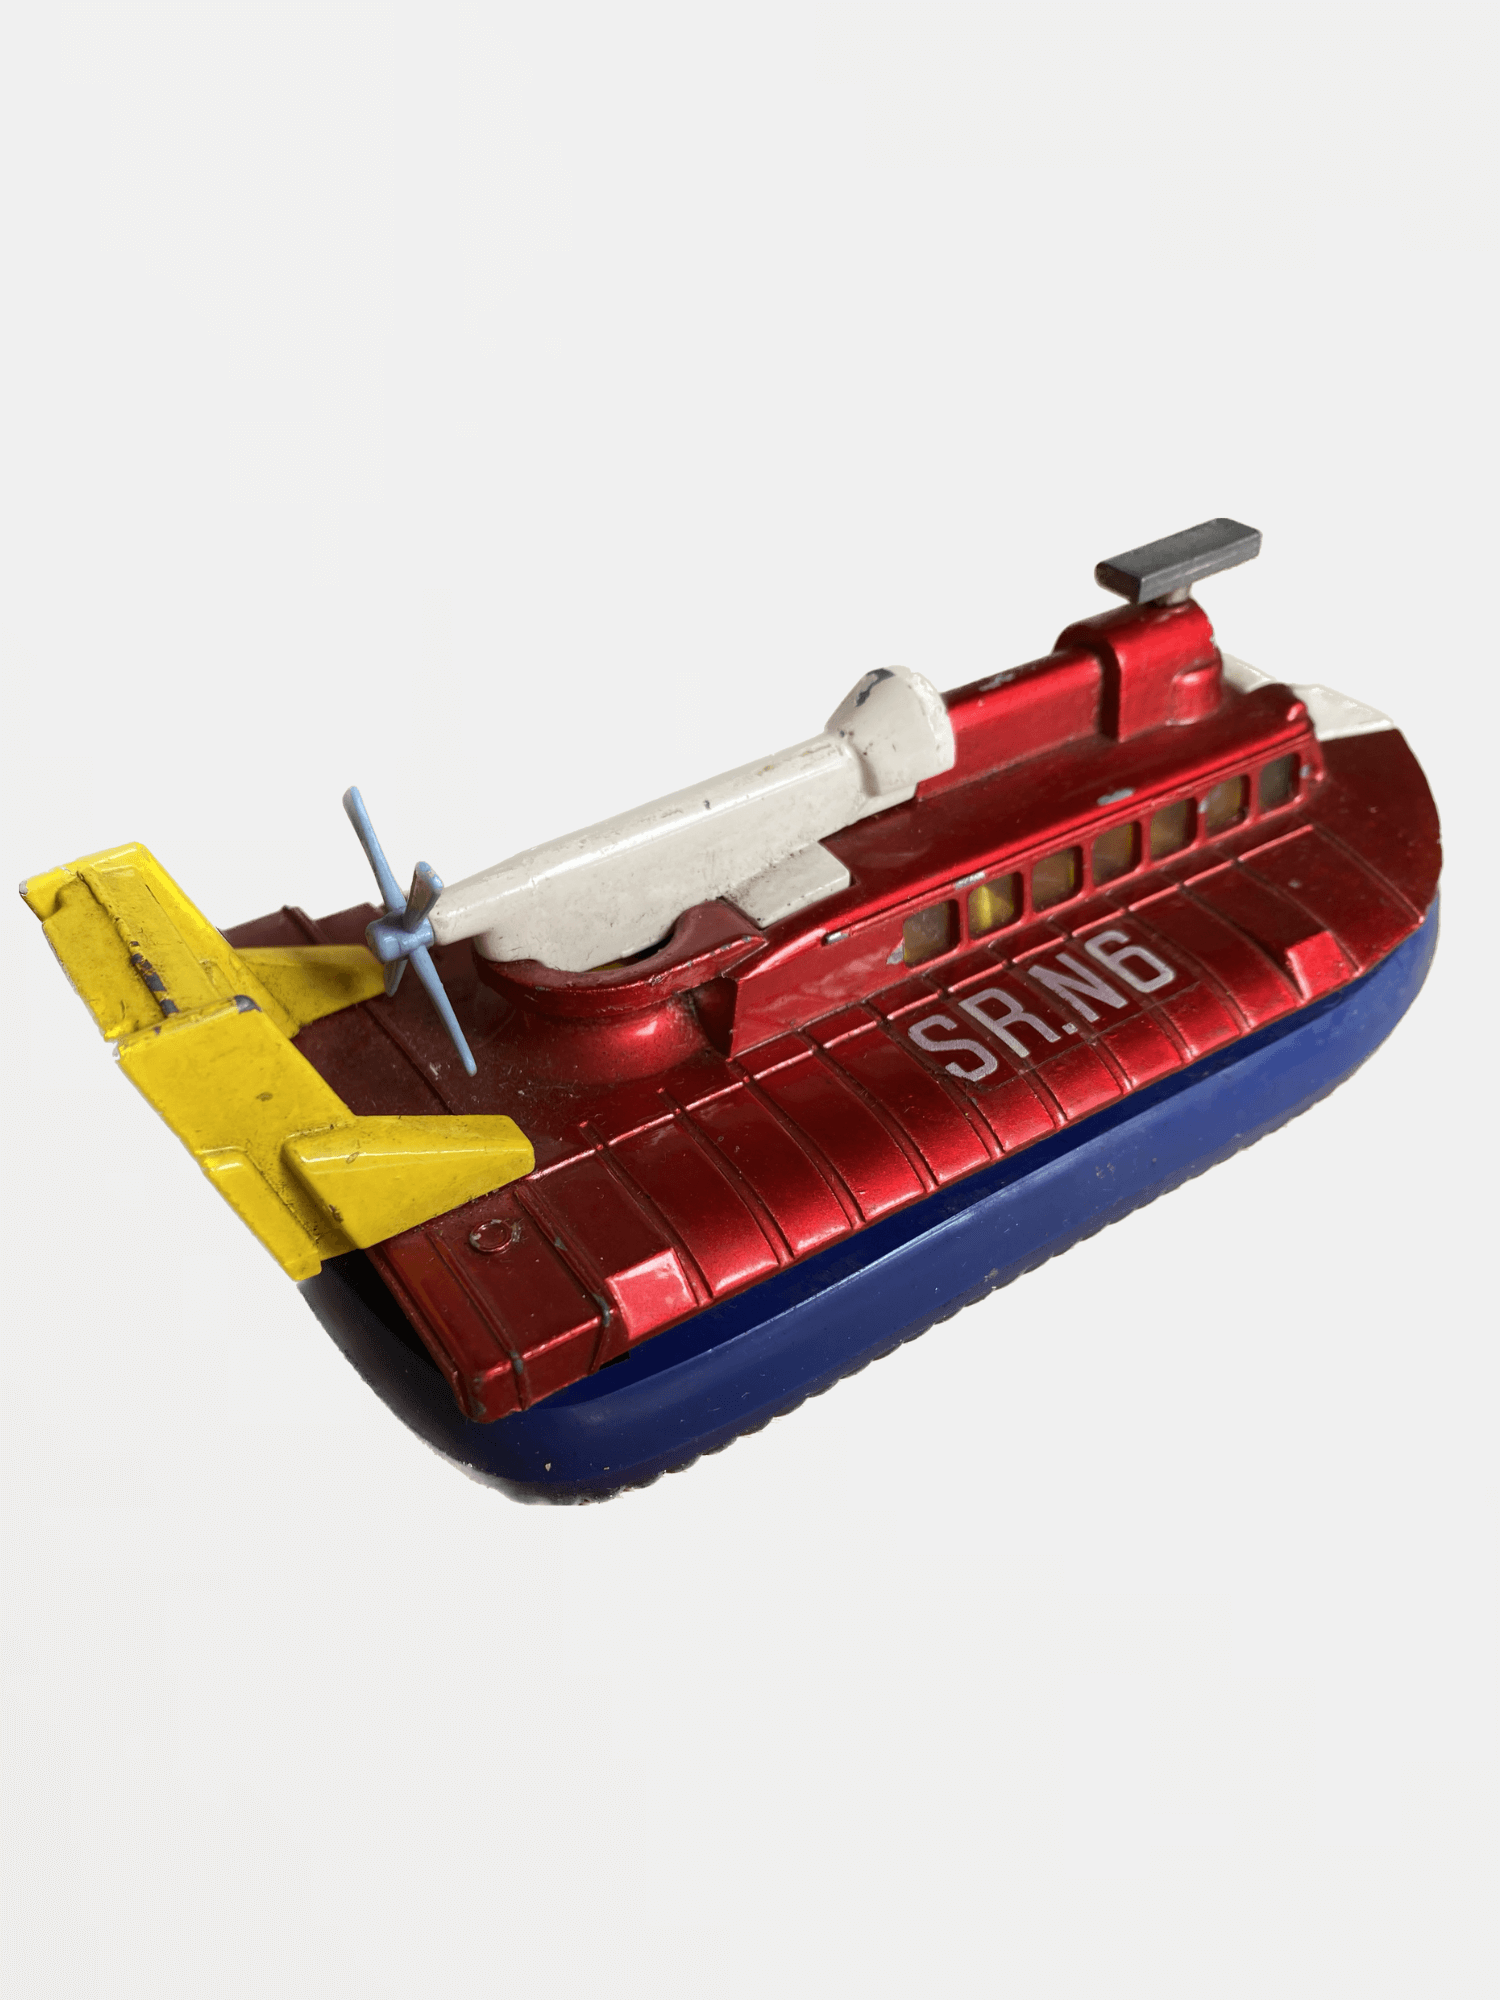 DINKY TOYS SR.N6 Hovercraft 290 Vintage Original Collectors Diecast Metal Toy Car Collectible Cars c1970s Made in England Red blue Collection Antique